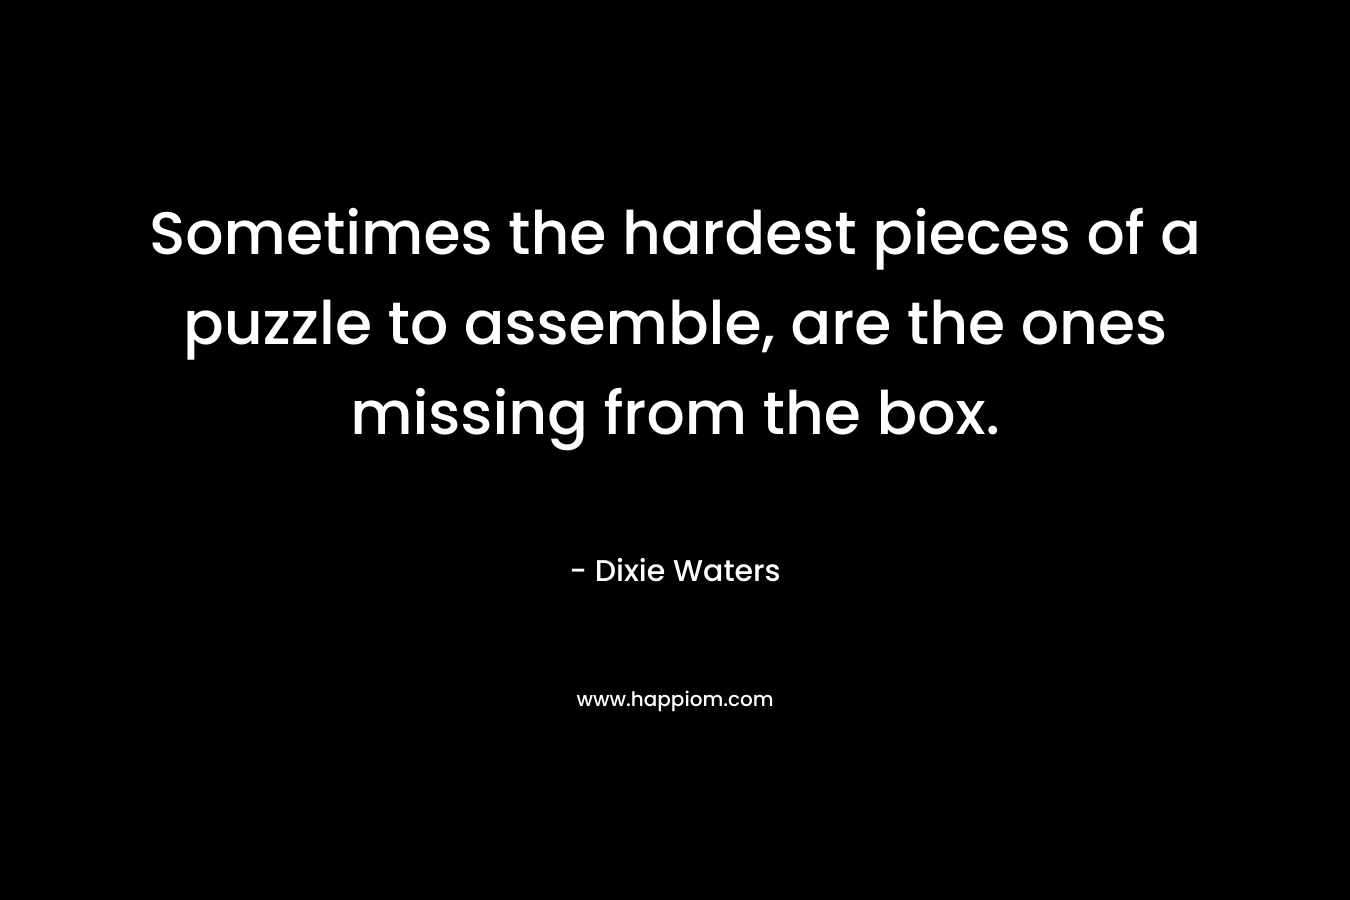 Sometimes the hardest pieces of a puzzle to assemble, are the ones missing from the box. – Dixie Waters